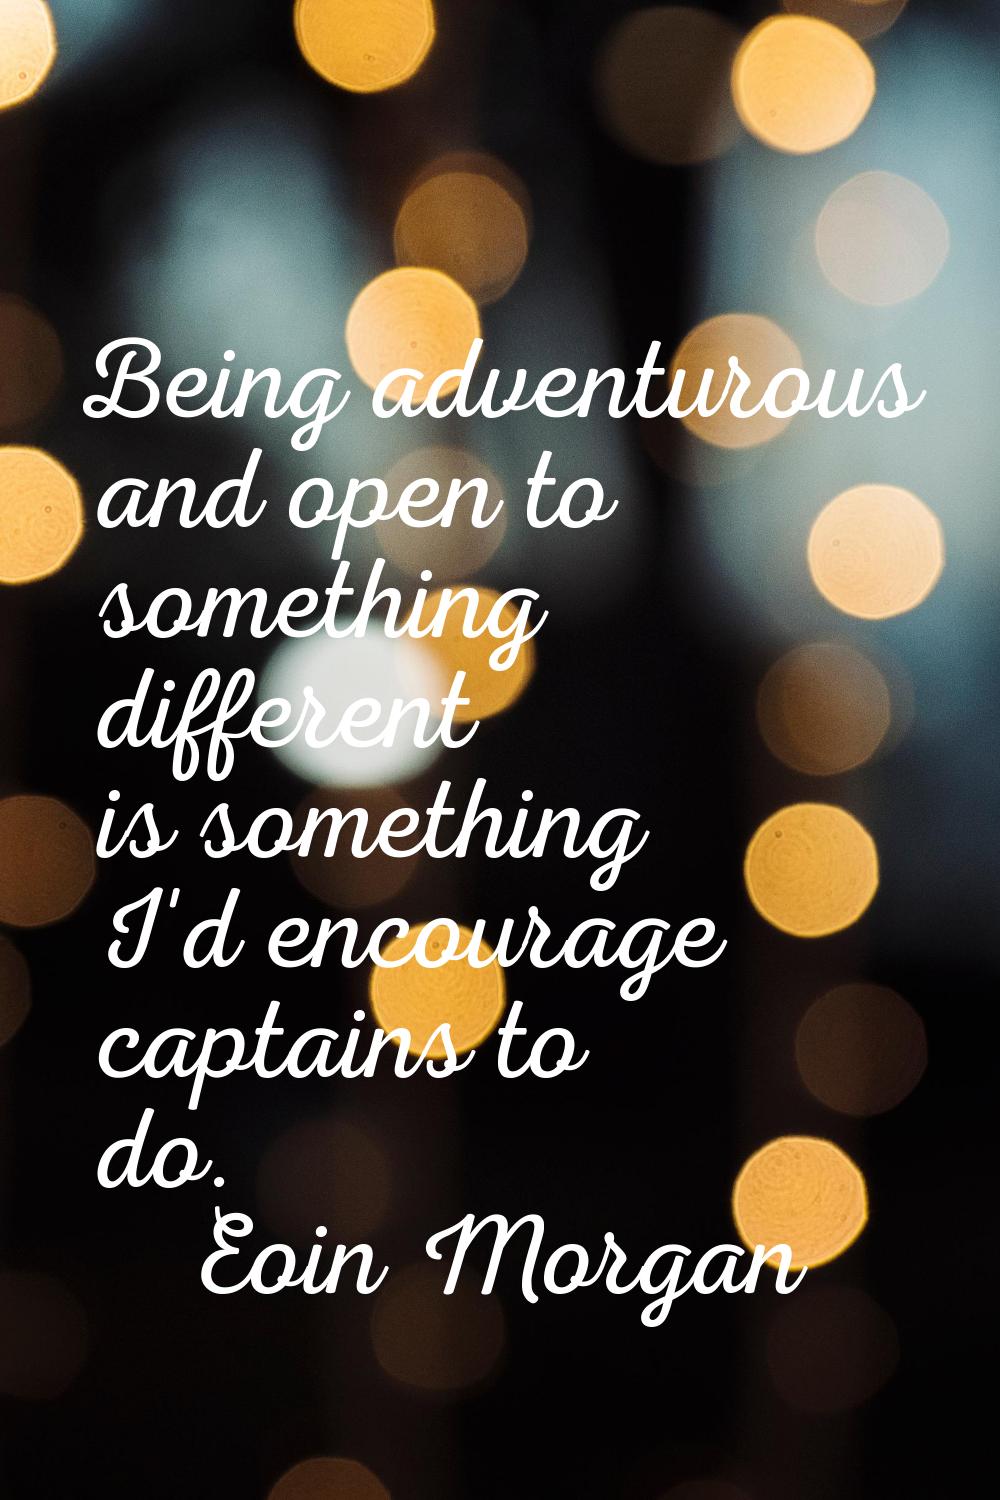 Being adventurous and open to something different is something I'd encourage captains to do.